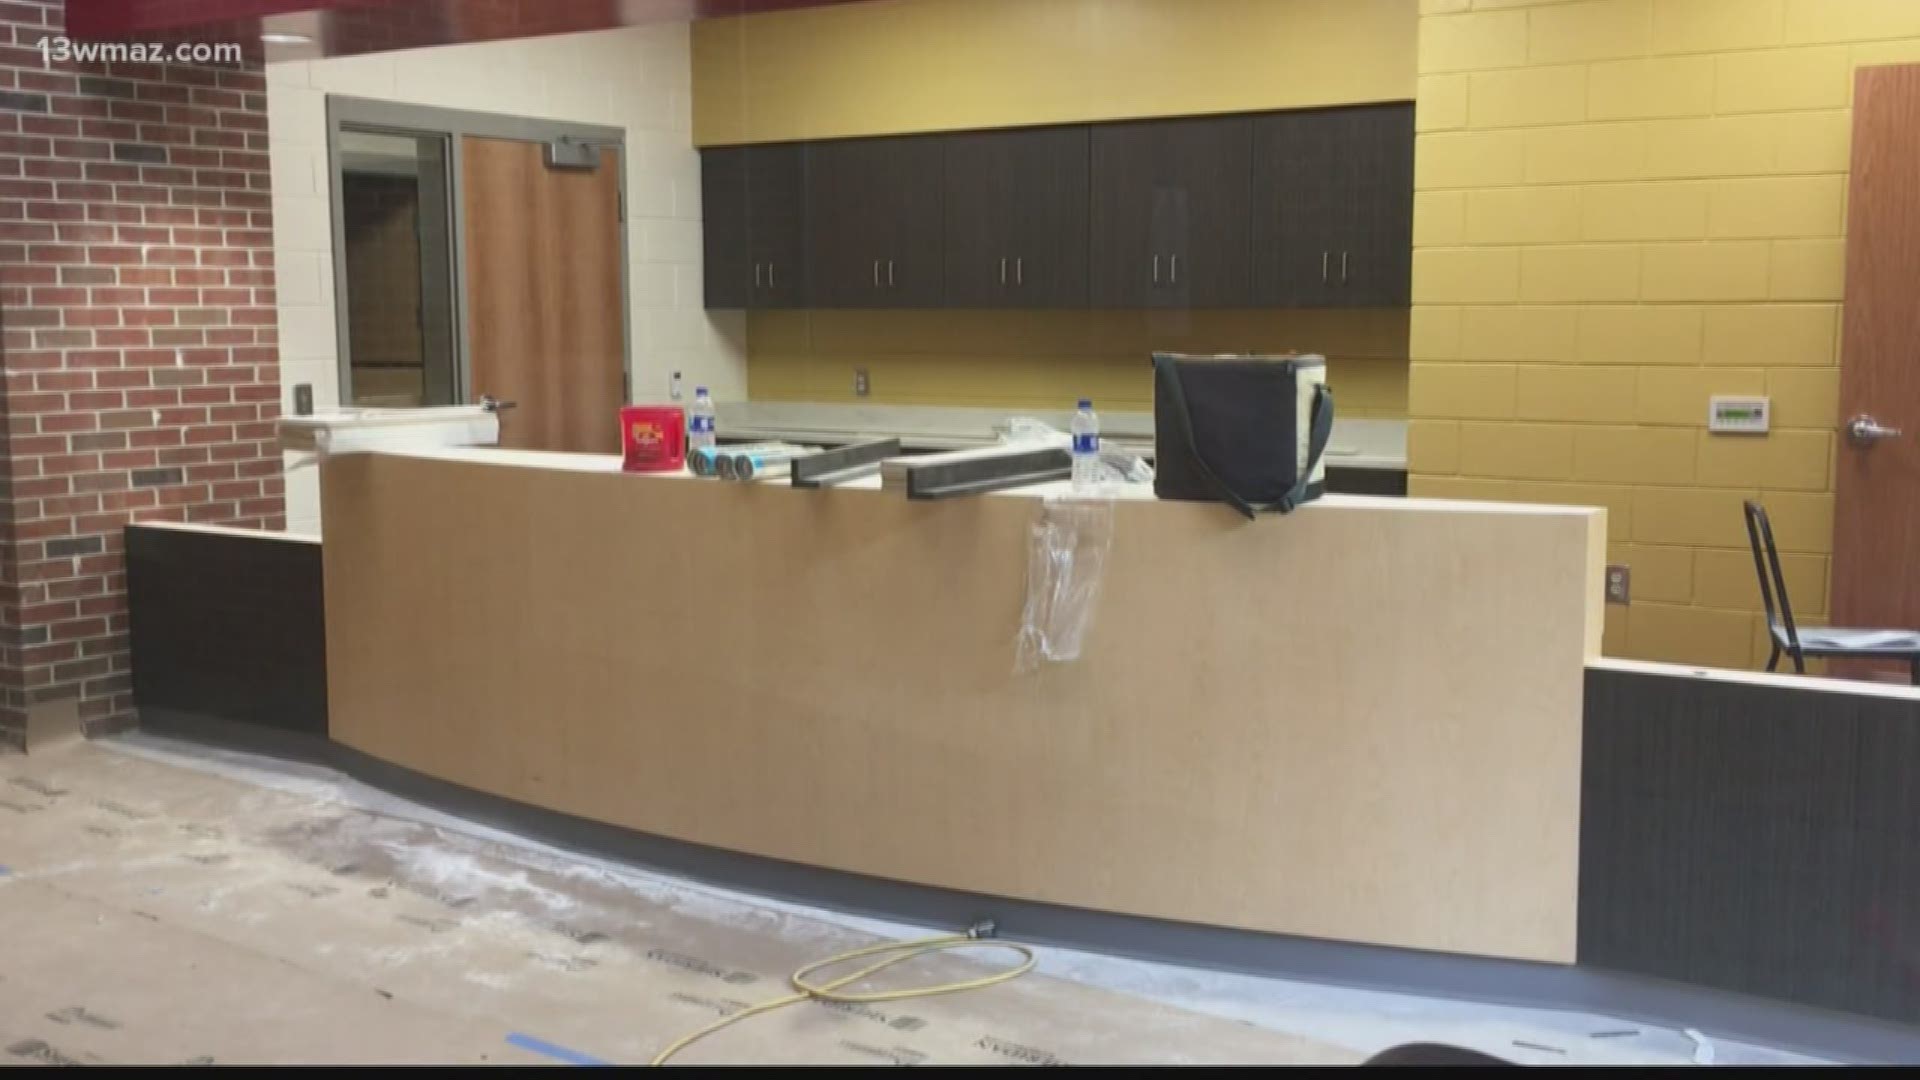 The 15-month renovation project is wrapping up, and we got an exclusive look inside what students will see when they return from summer break